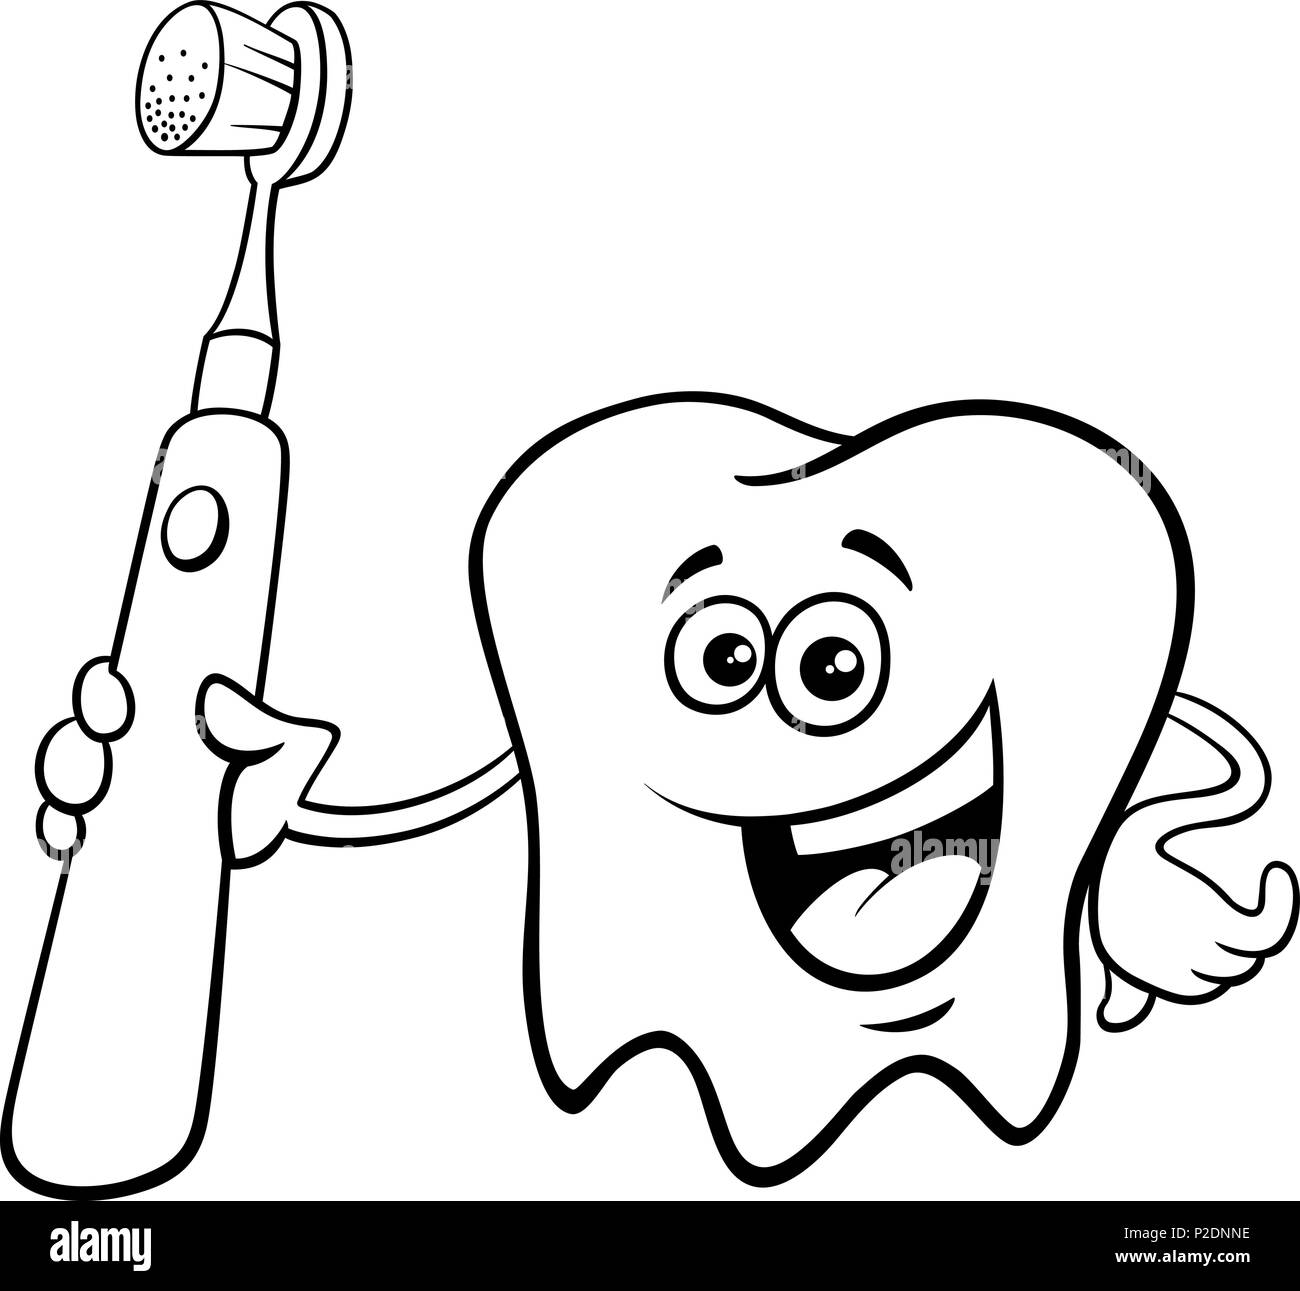 Black and white cartoon illustration of happy tooth character with electric toothbrush coloring book stock vector image art